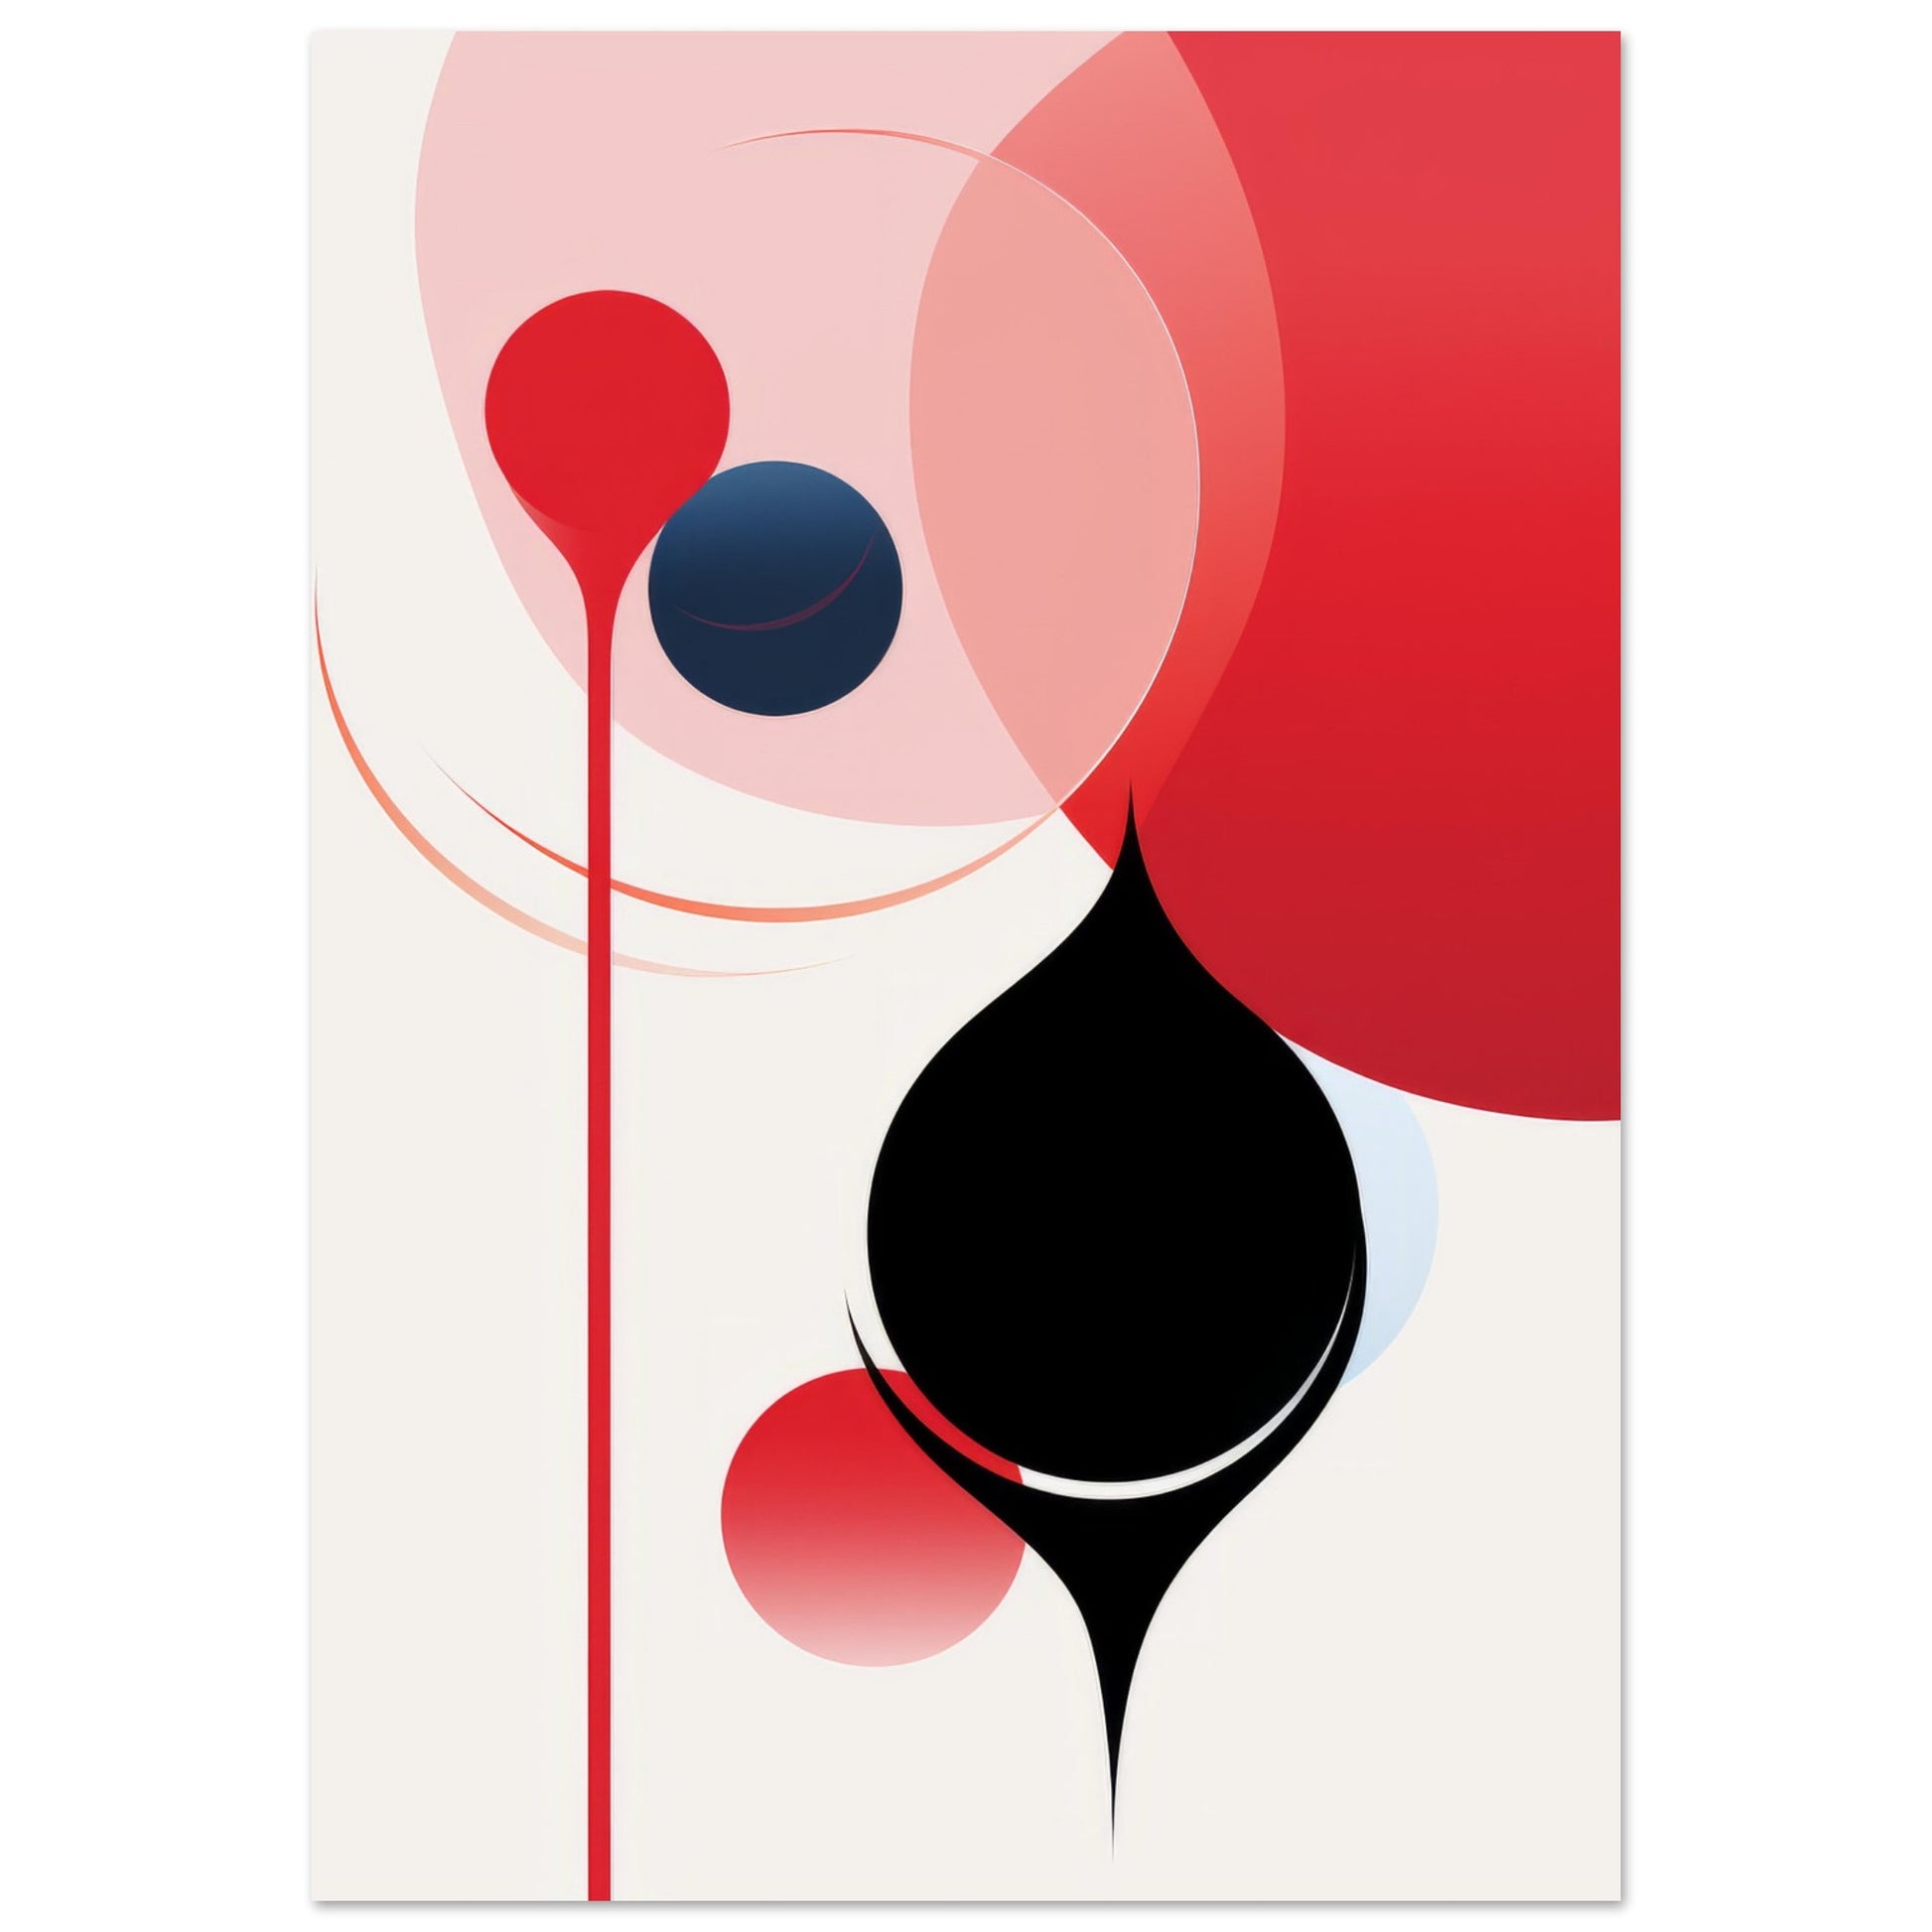 A minimalist modern art print titled "Soothing" showcasing abstract forms in red and black, symbolizing the interplay of emotions and contrast. An epitome of contemporary wall decor that resonates with depth and elegance.